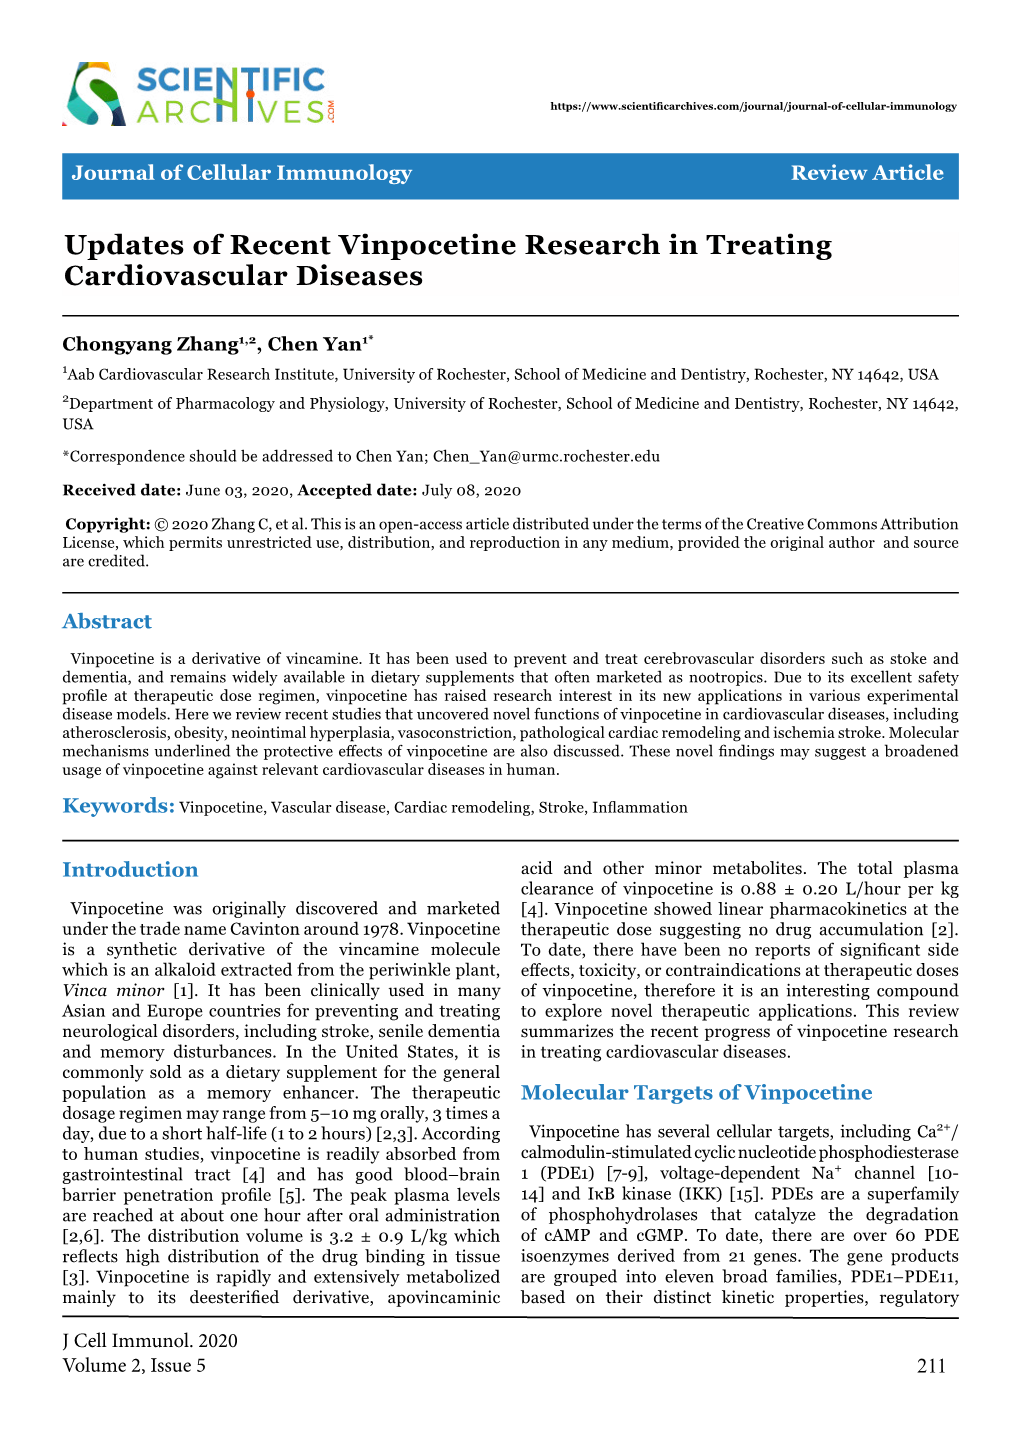 Updates of Recent Vinpocetine Research in Treating Cardiovascular Diseases